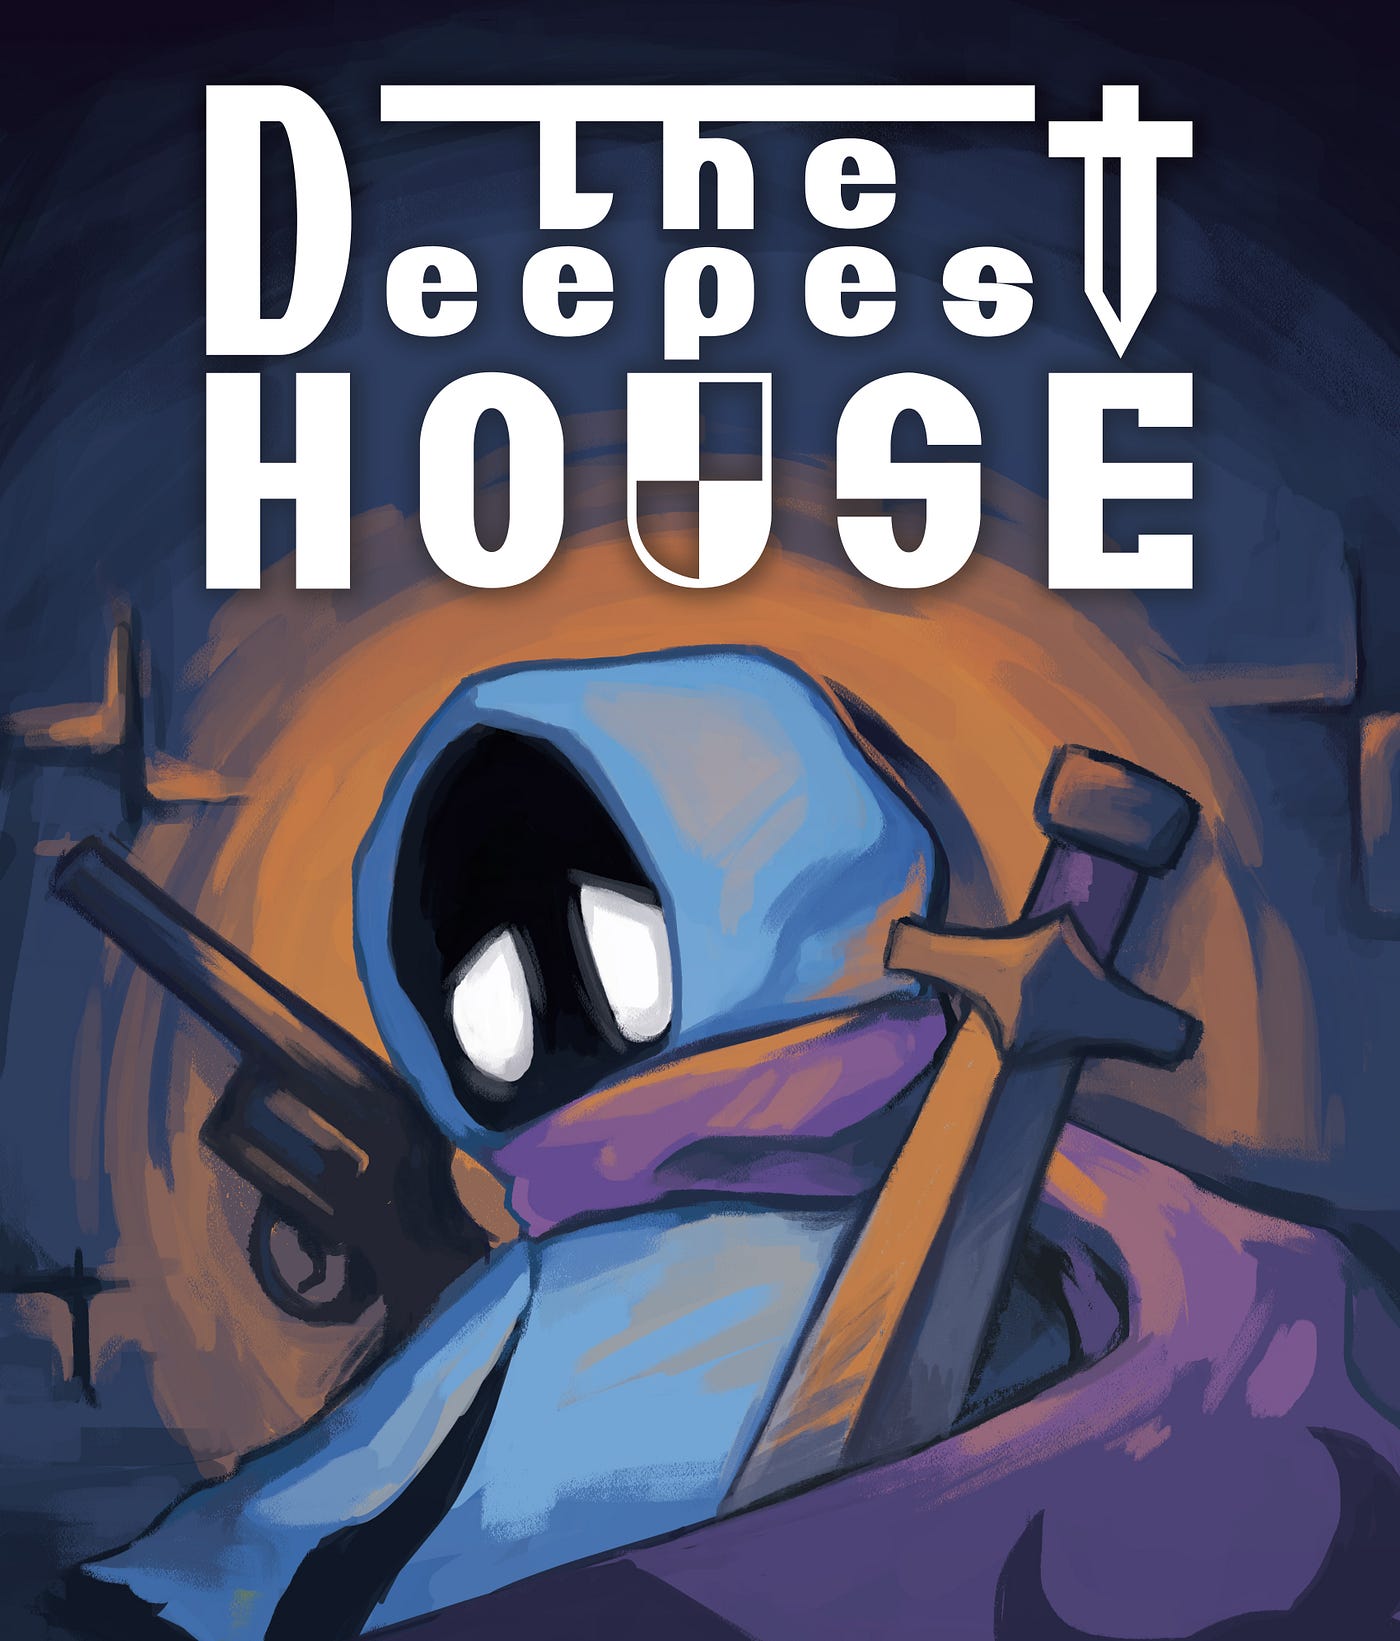 Reis Tablet US dollar Indie Developer Mr. Thee Interview — The Deepest House | by Fawzi Itani |  Medium